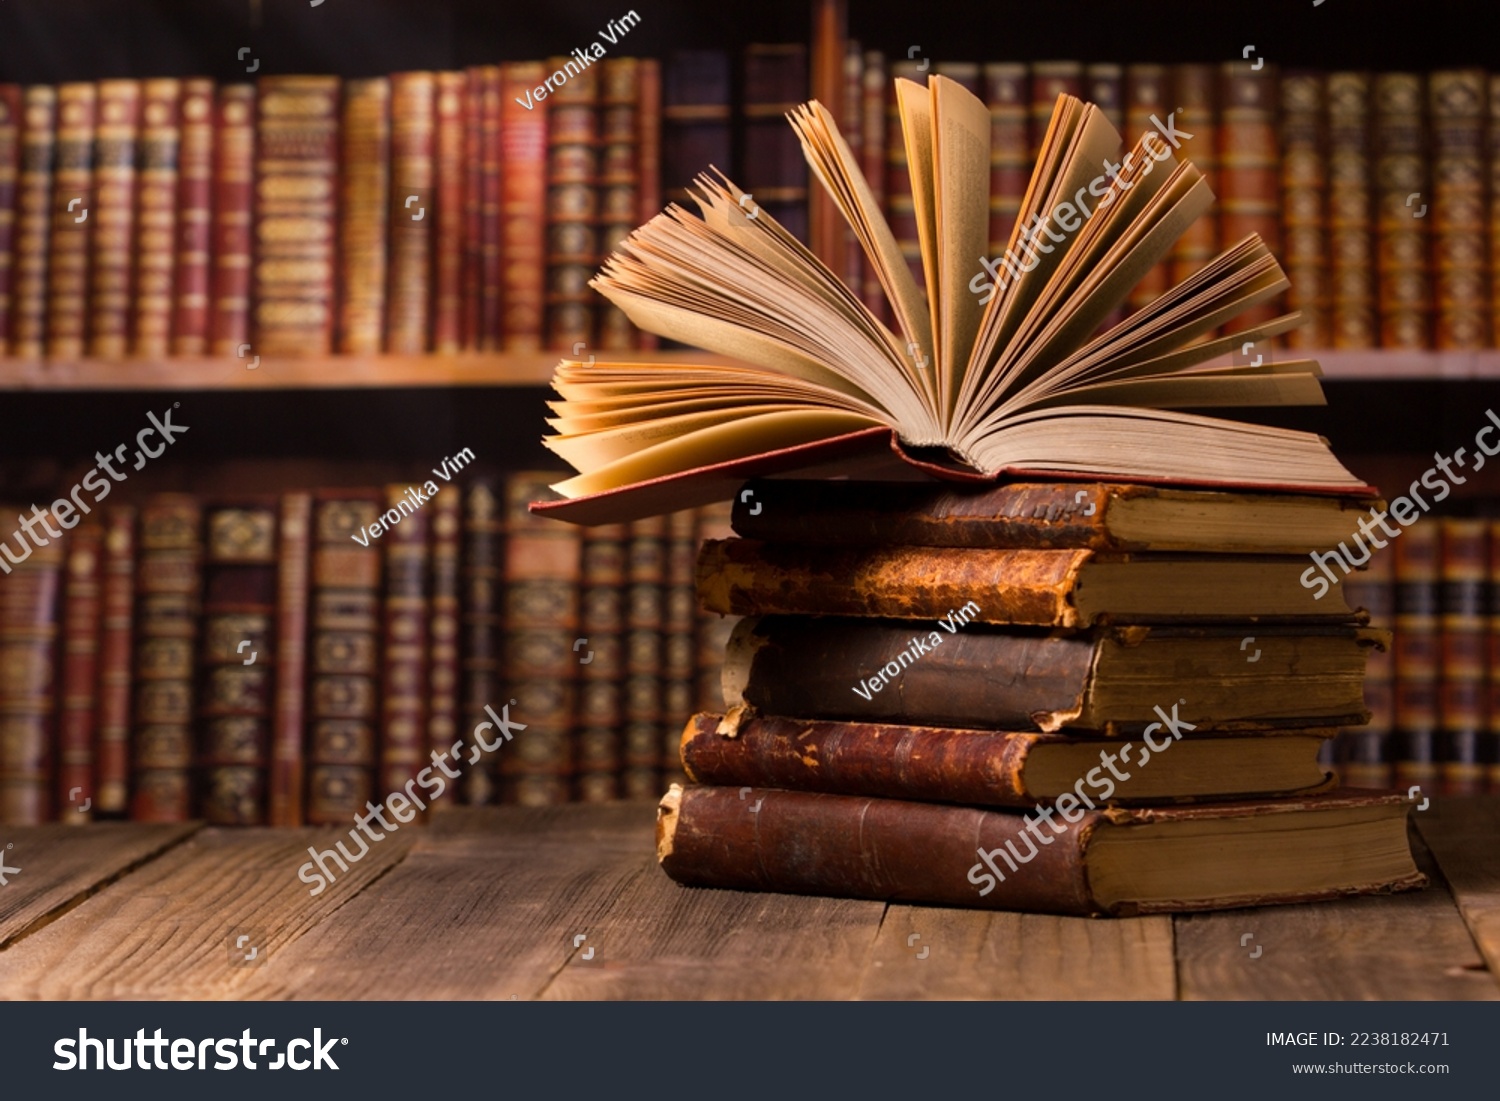 Composition with vintage old hardback books, diary, fanned pages on wooden deck table and red background. Books stacking. Back to school. Copy Space. Education background.	 #2238182471